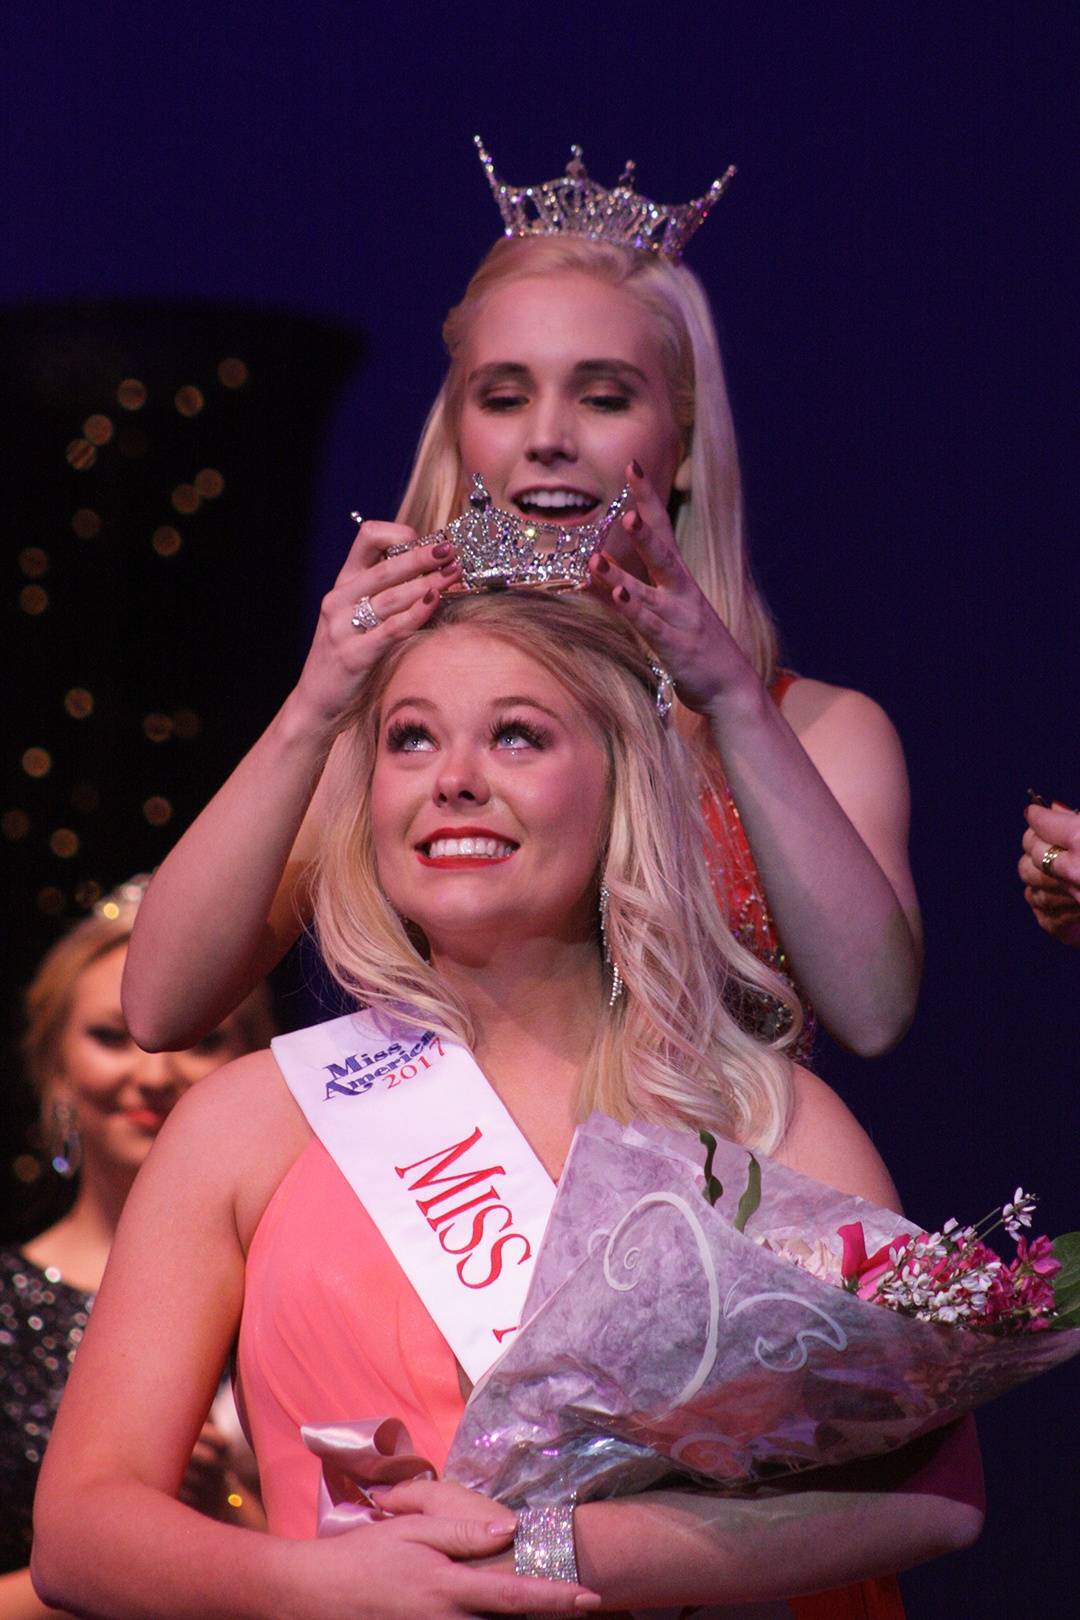 Cami Werden, 2016 Miss Auburn, places the crown on the 2017 queen, Heather Haggin during last year’s coronation at the Performing Arts Center. MARK KLAAS, Auburn Reporter